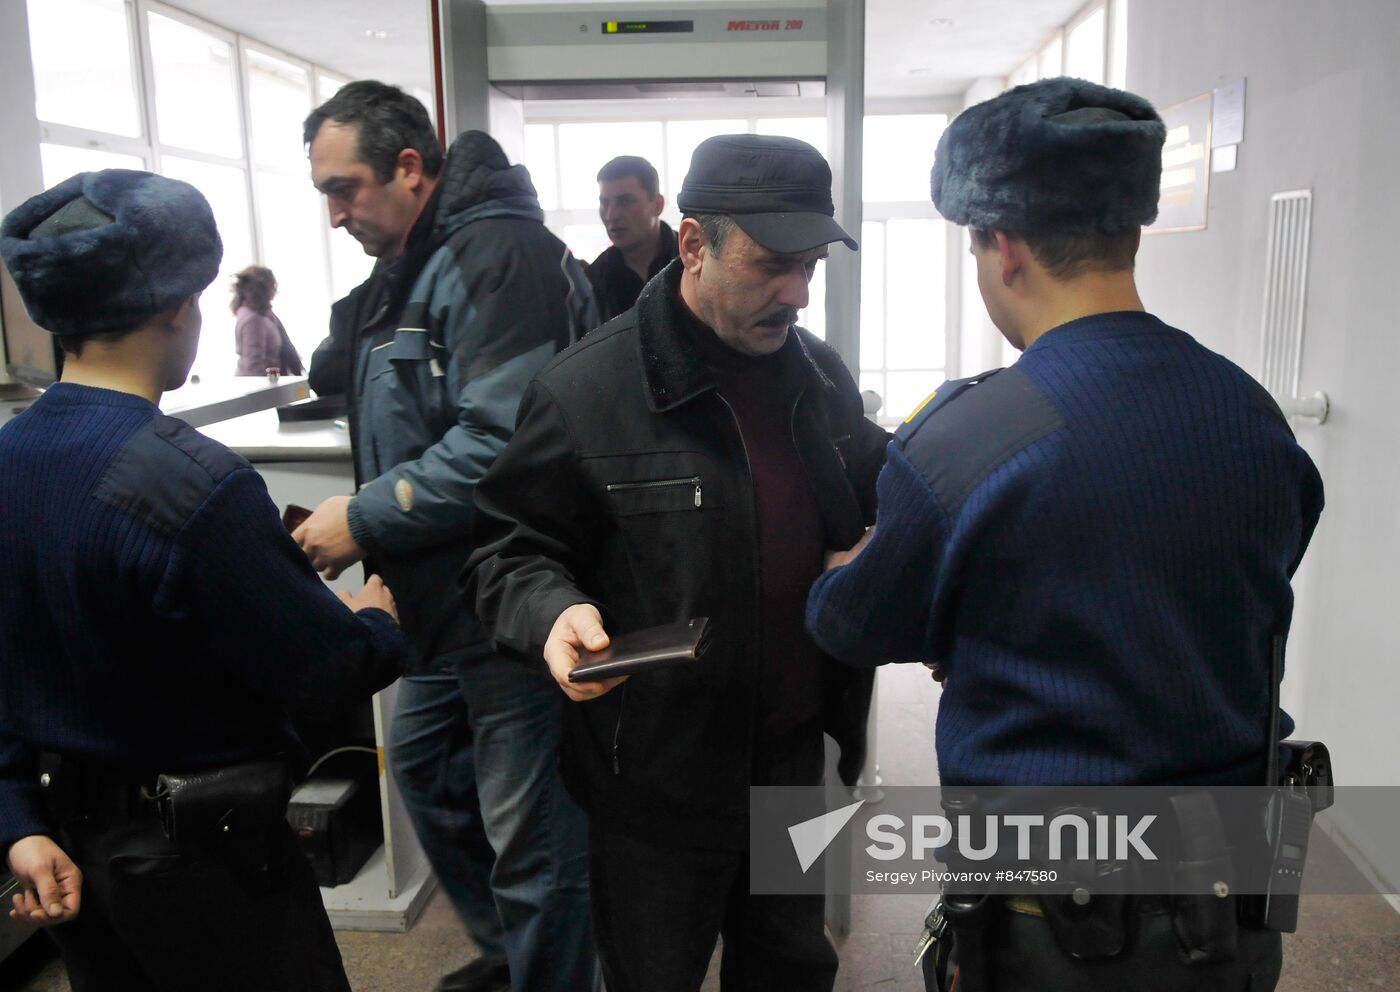 Tightening security at the Rostov-on-Don airport